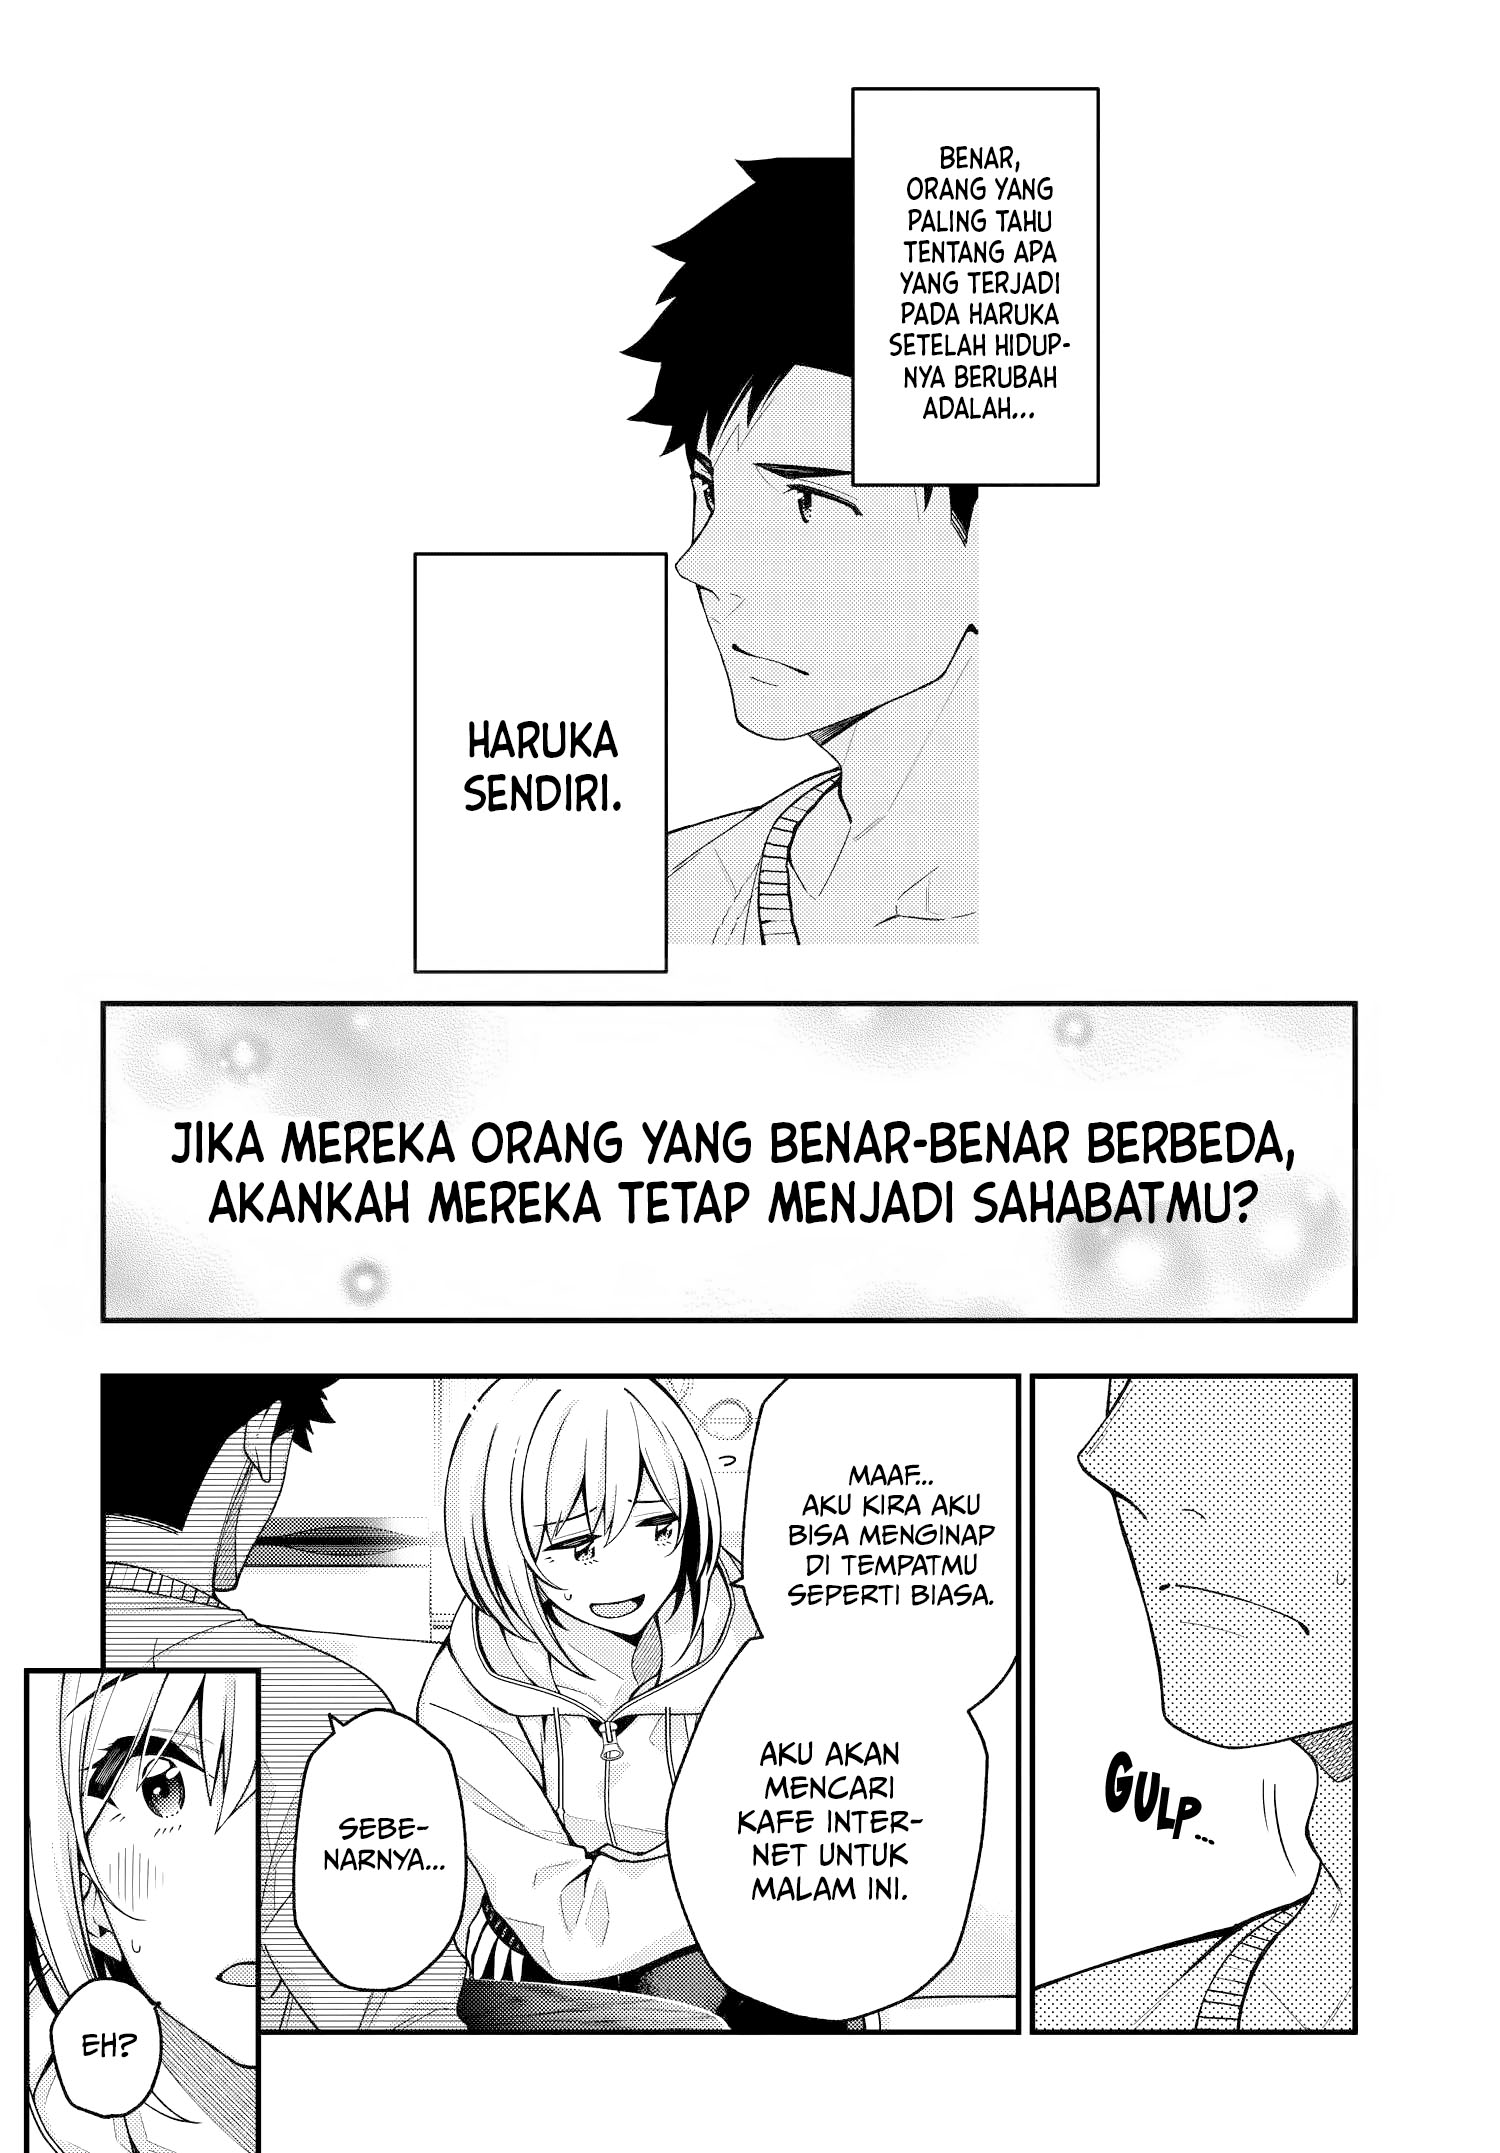 A Choice of Boyfriend and Girlfriend Chapter 02 31